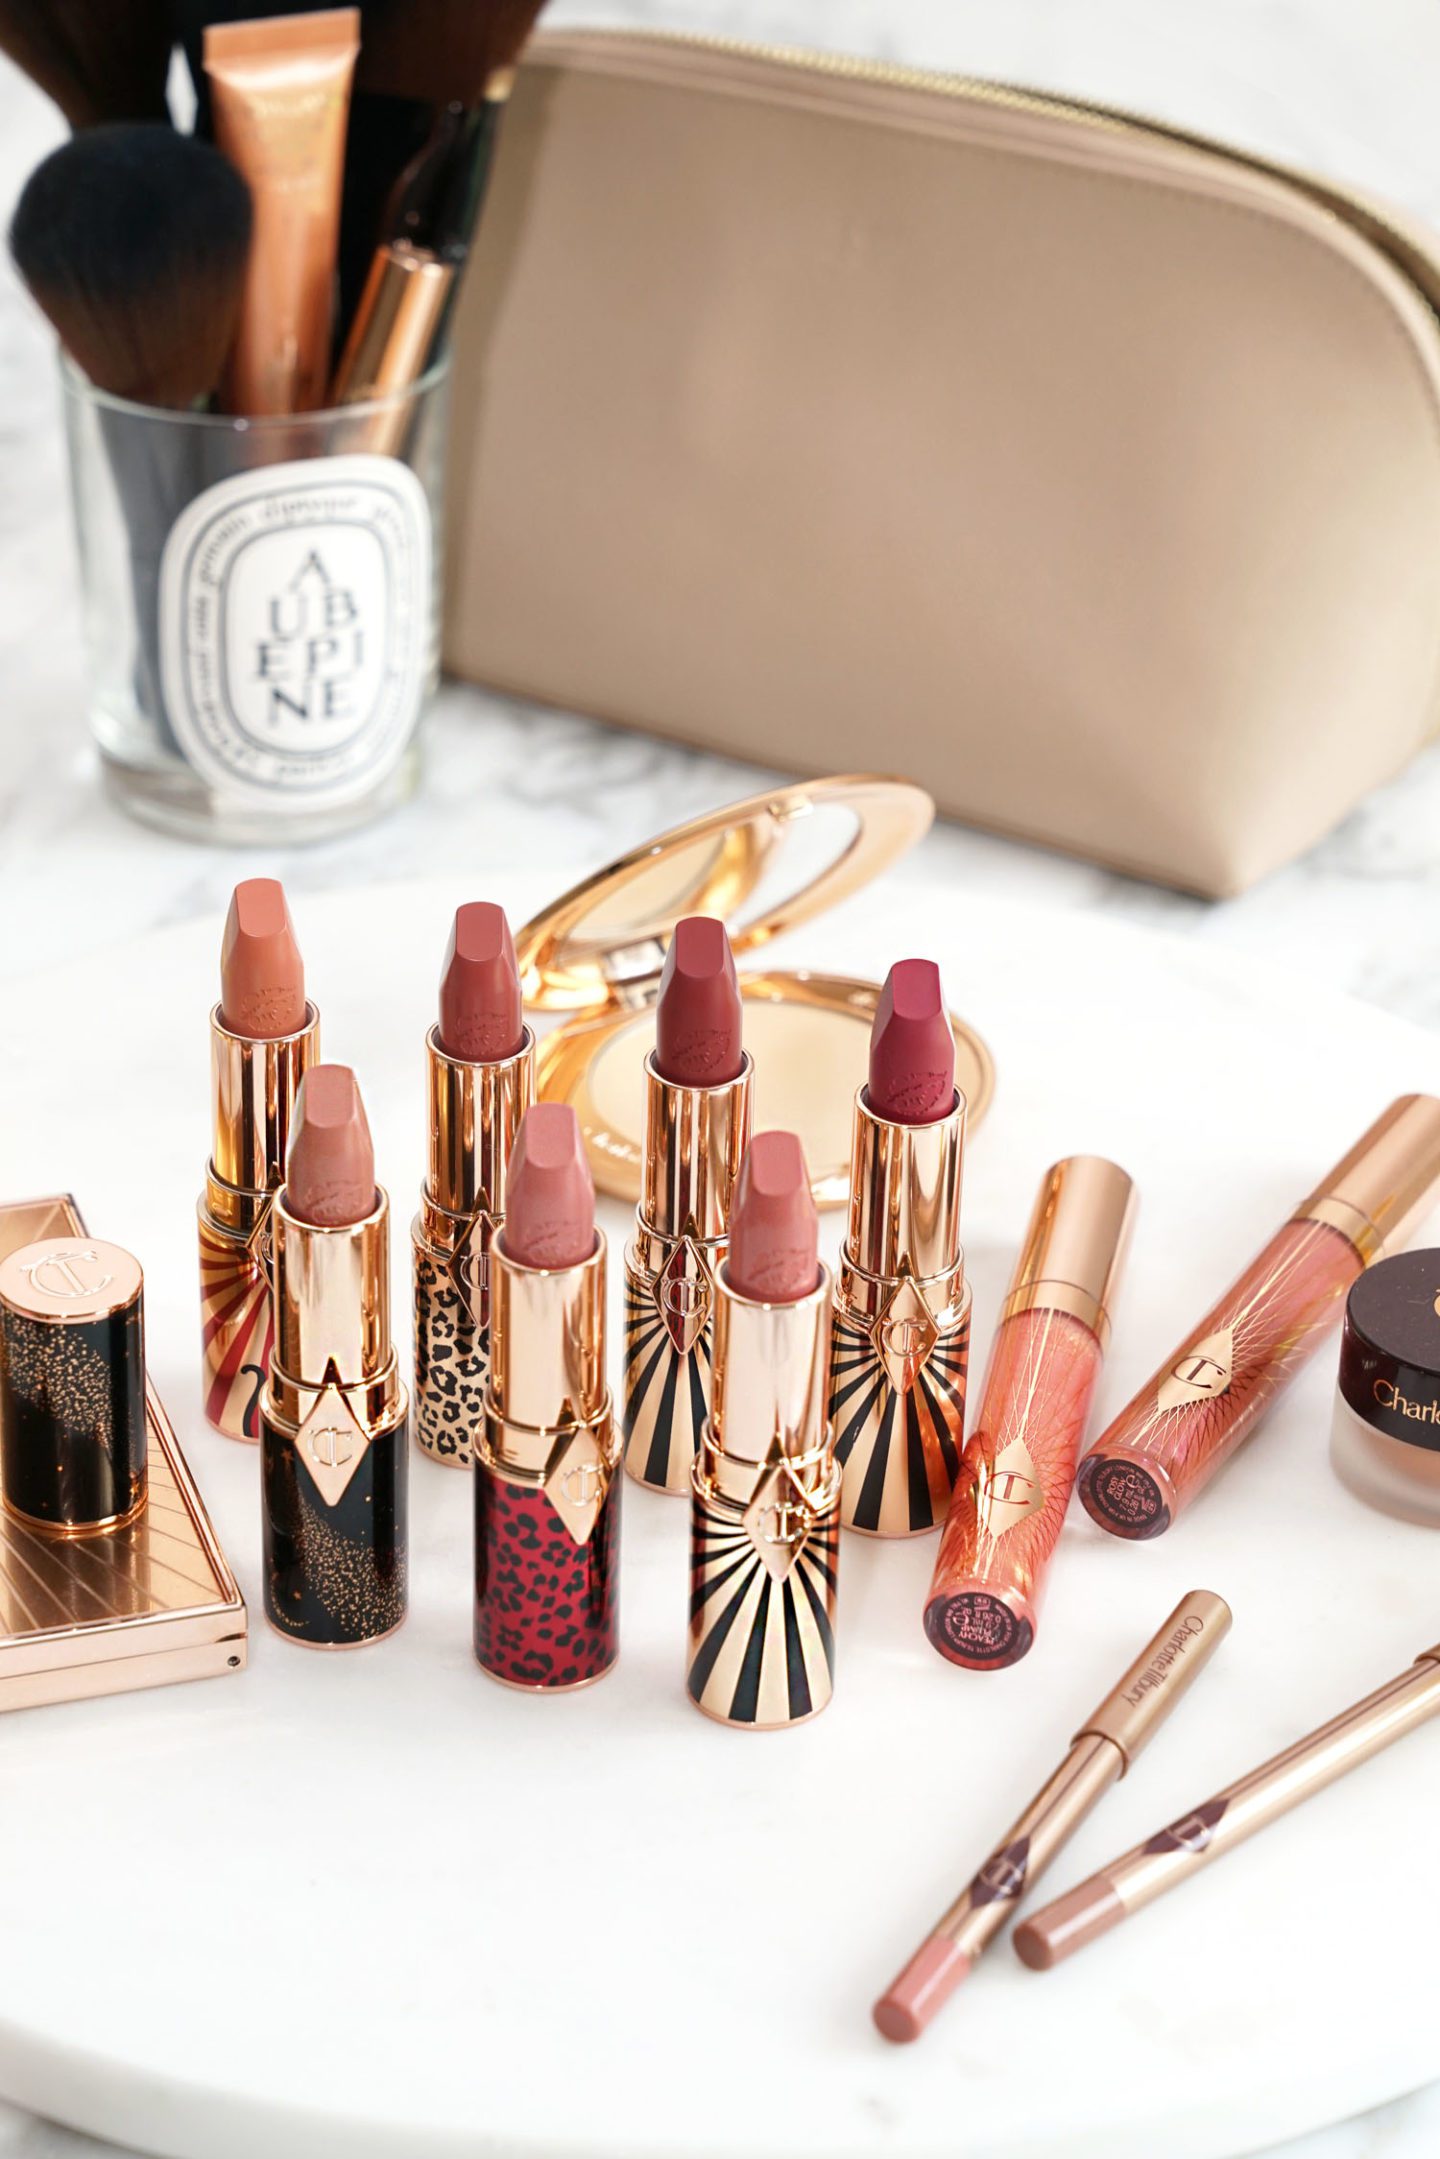 Charlotte Tilbury Hot Lips 2 and Collagen Lip Bath Tinted Shades Review | The Beauty Look Book